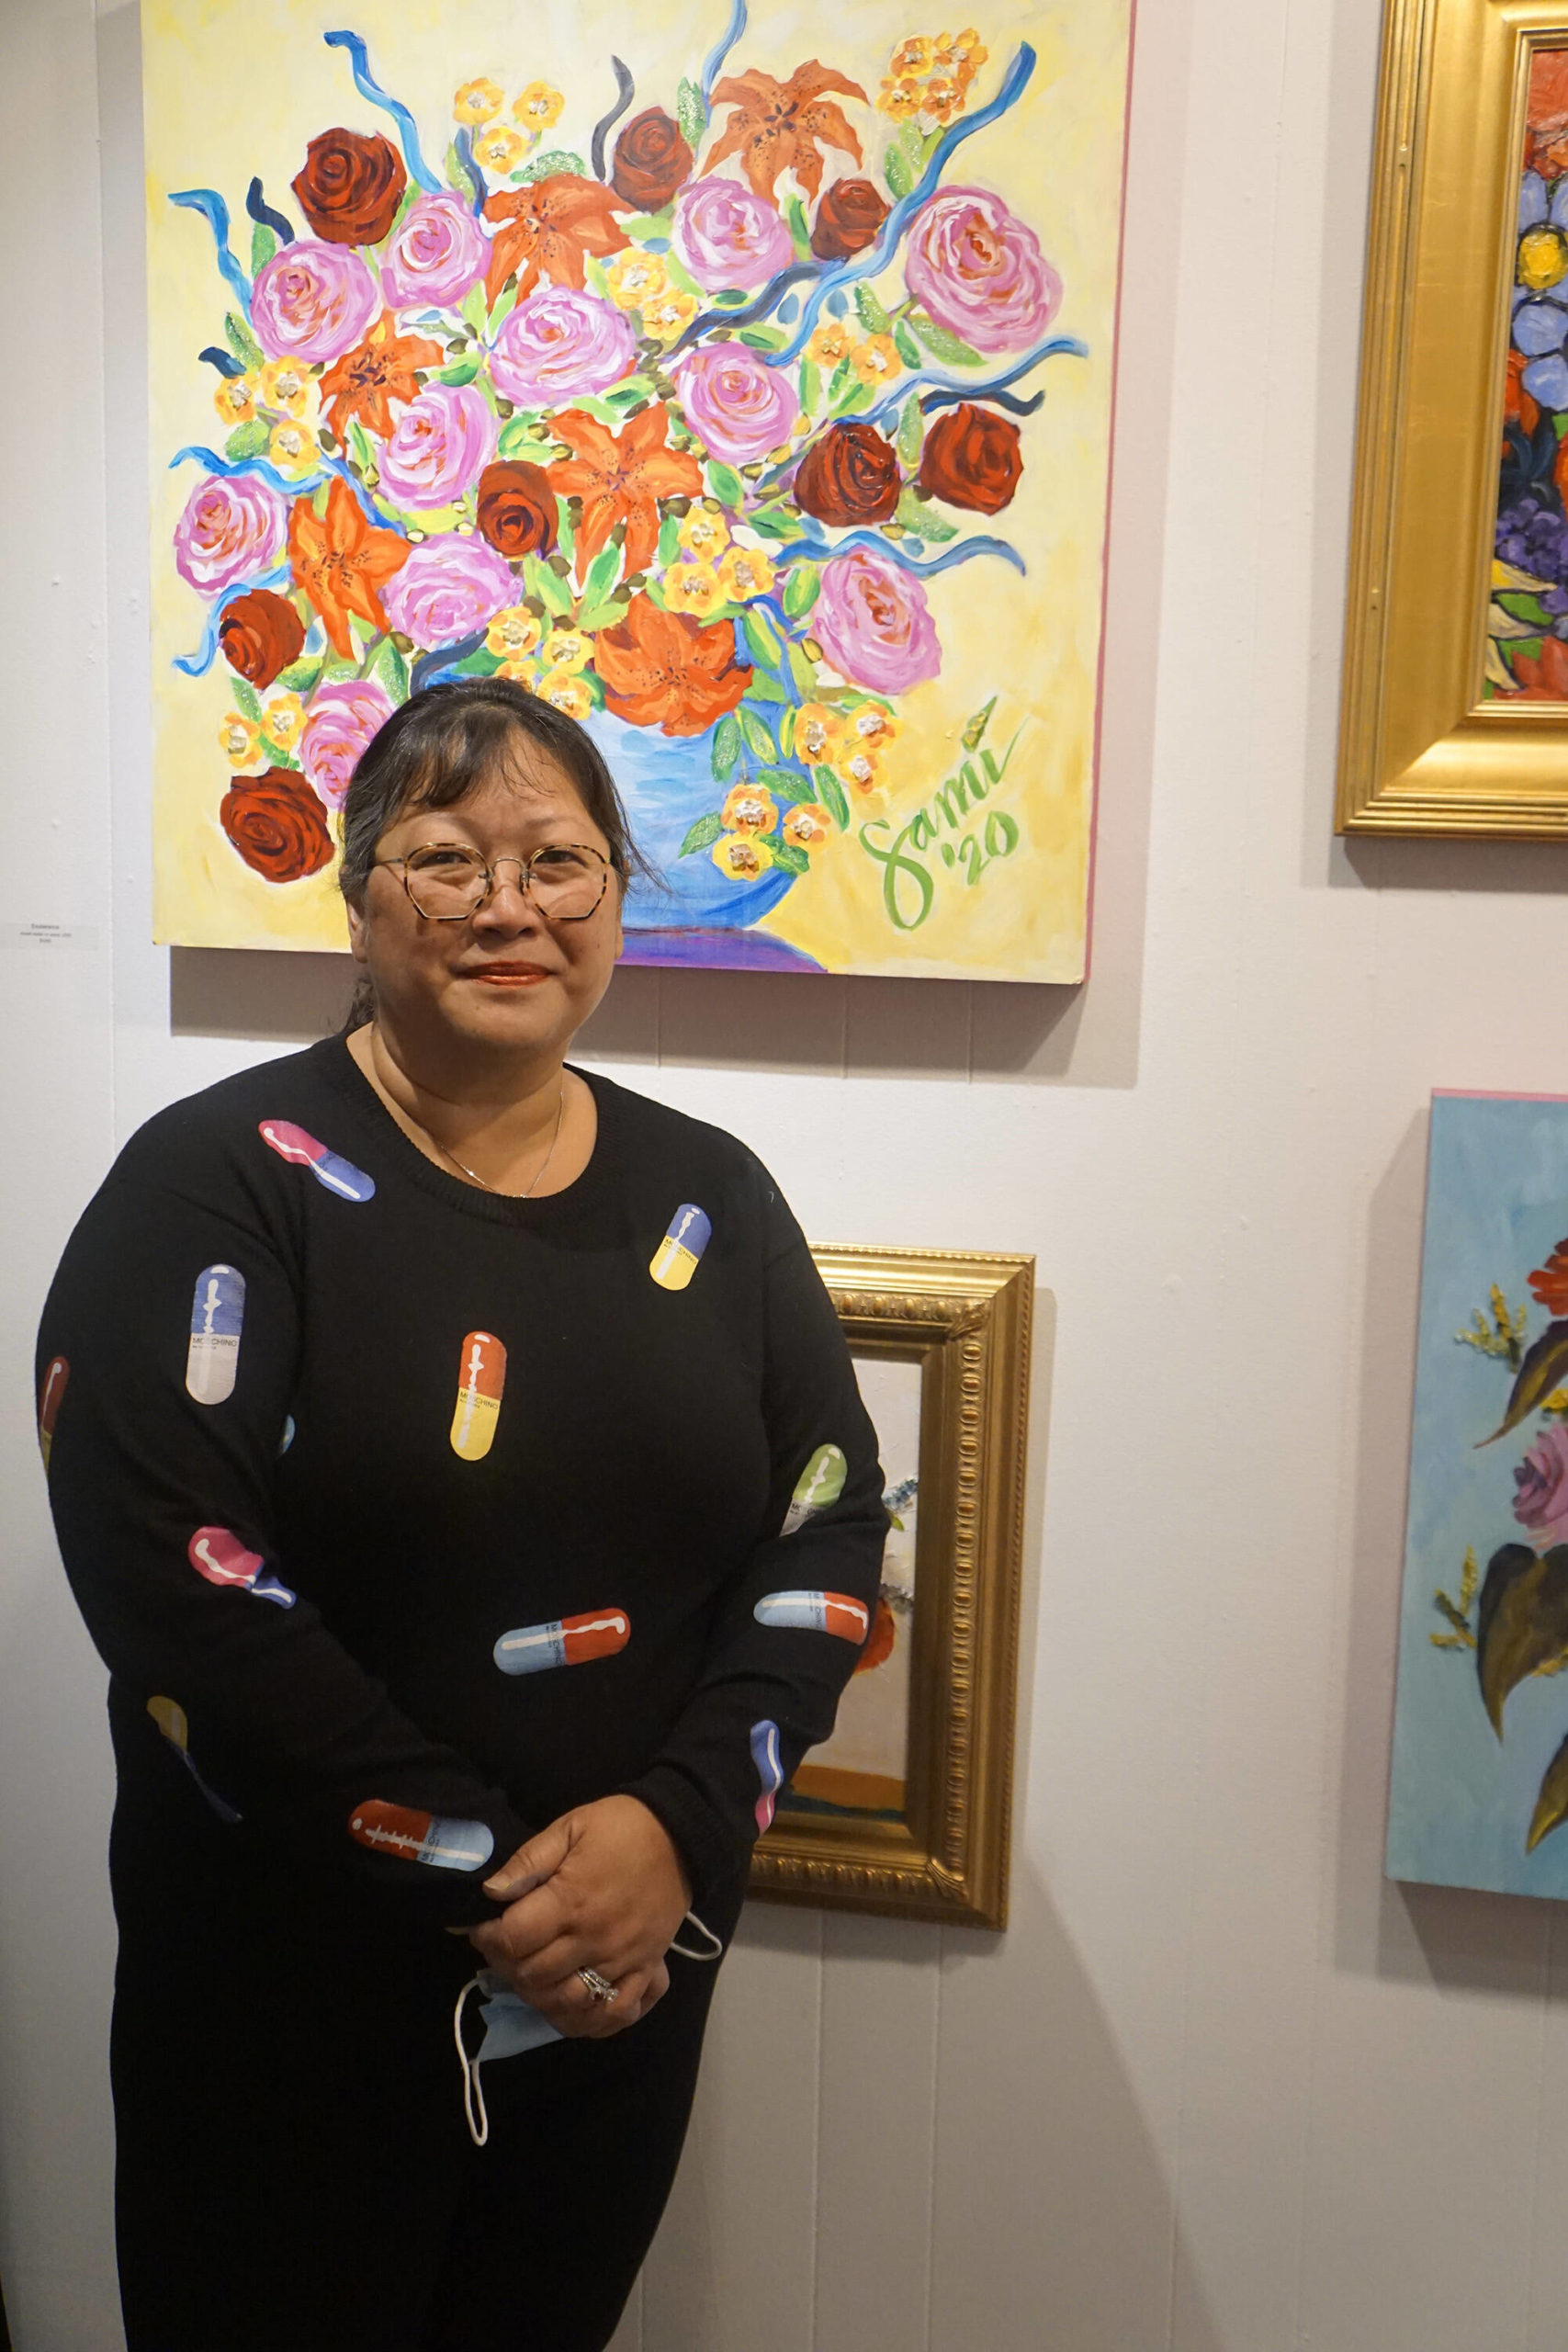 Dr. Sami Ali’s poses in front of some her paintings in her show, “The Mind of a Healthcare Worker During the COVID-19 Pandemic,” on Friday, Jan, 7, 2022, at the Homer Council on the Arts in Homer, Alaska. (Photo by Michael Armstrong/Homer News)